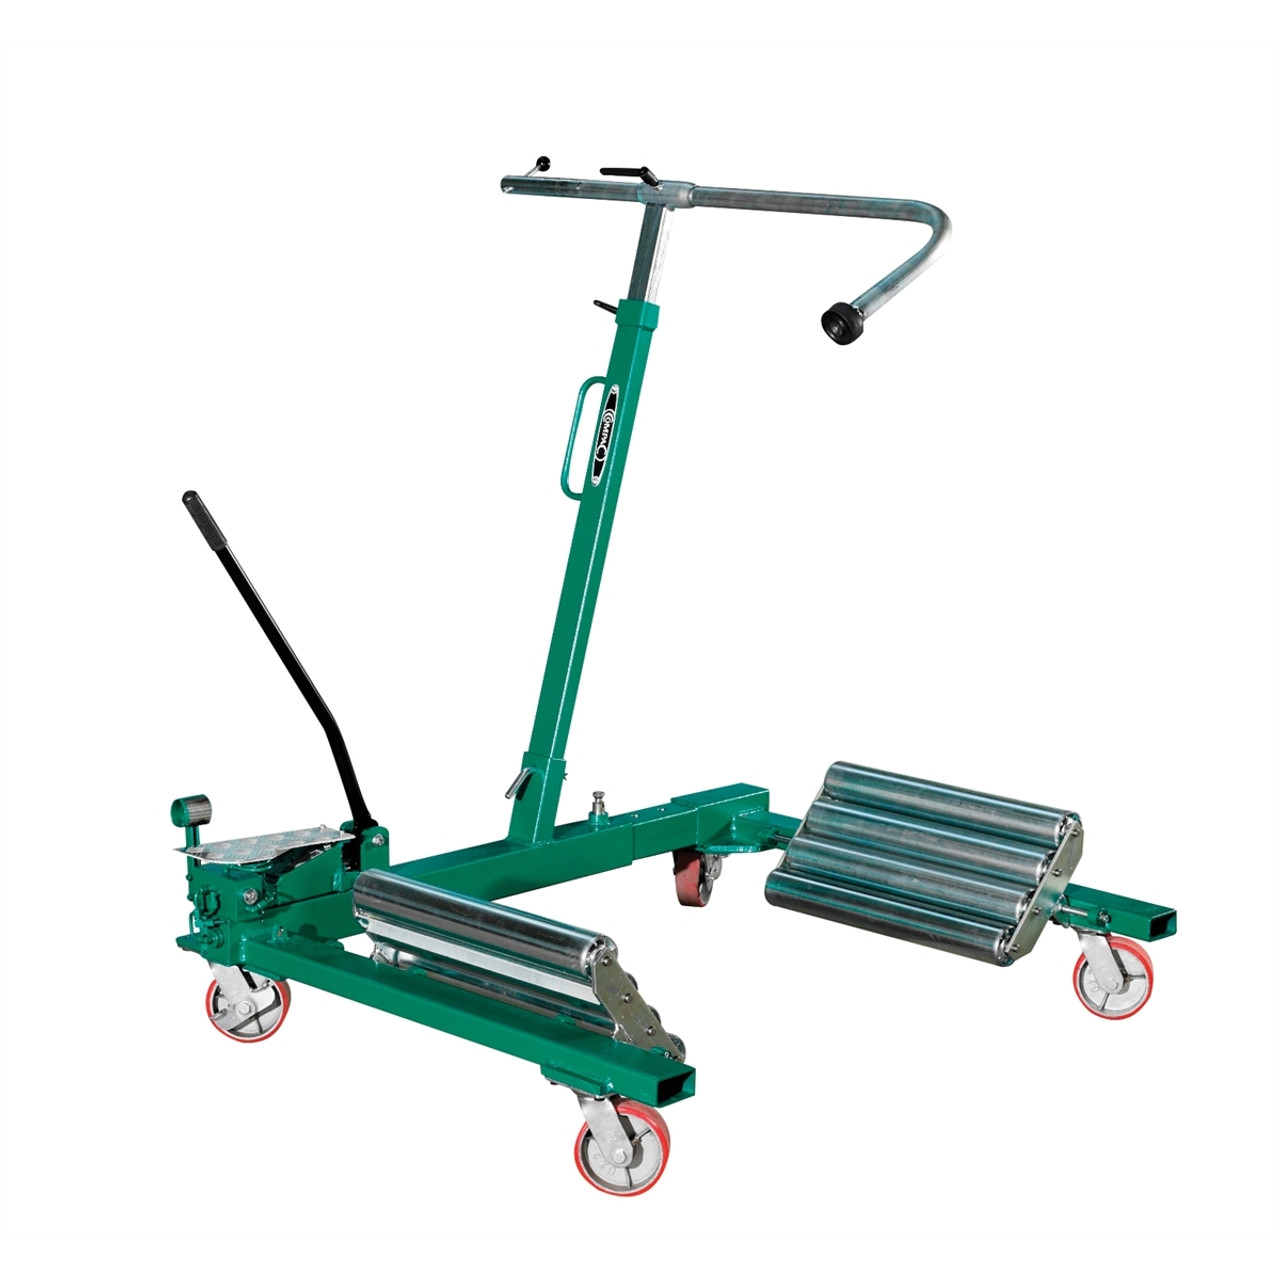 AGRICULTURE WHEEL DOLLY